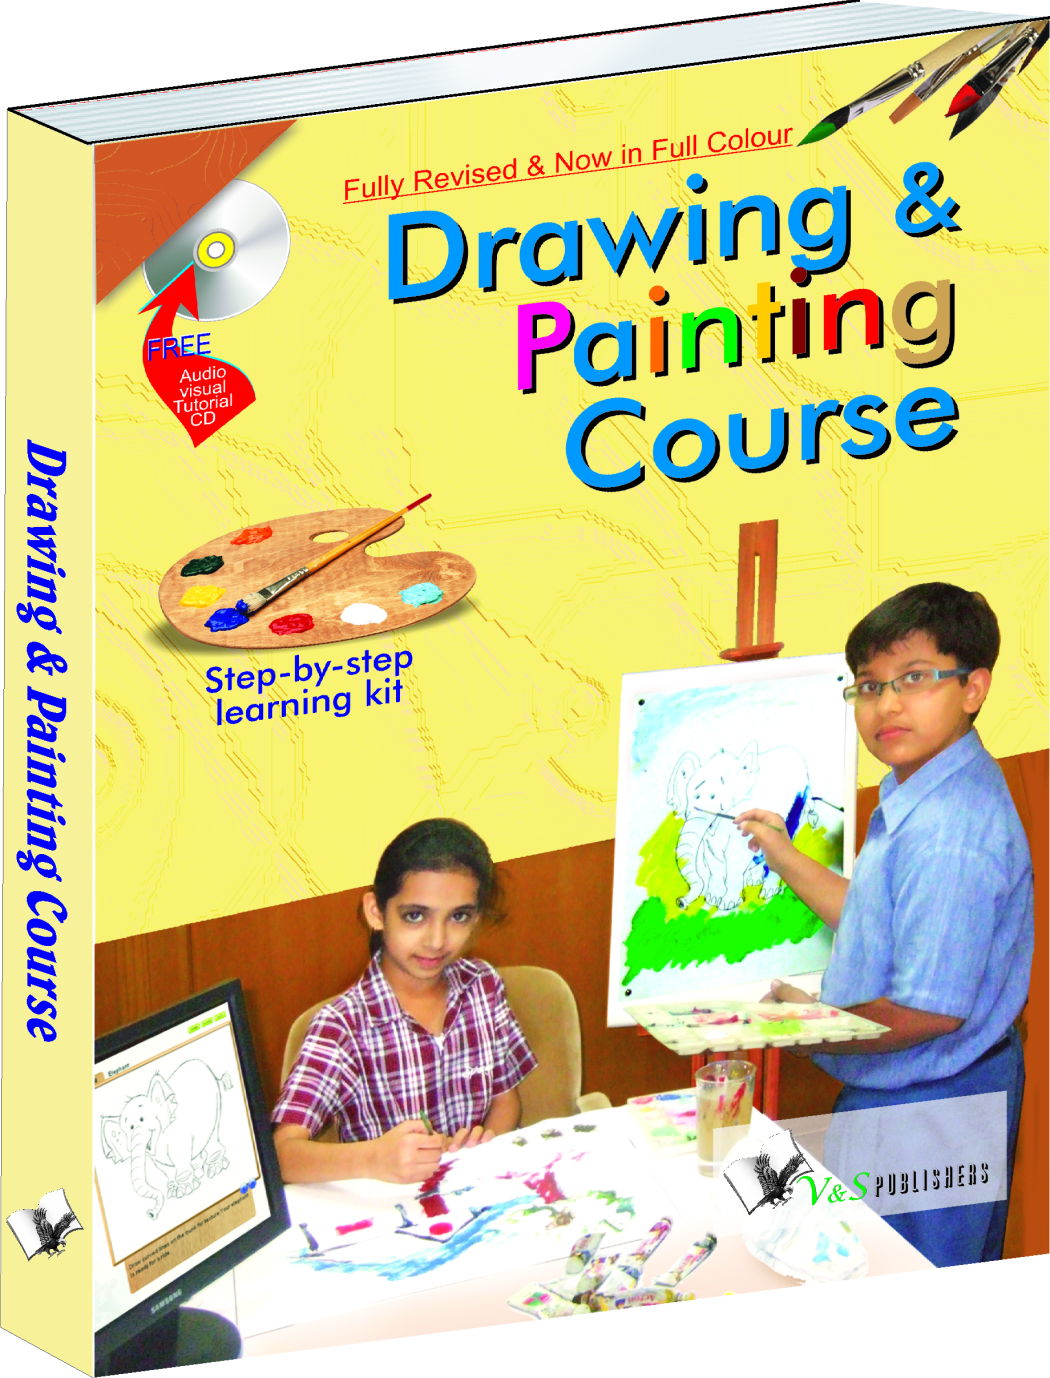 Drawing & Painting Course  (With Online Content on  Dropbox)-Learn how to draw lines, sketches, figures 